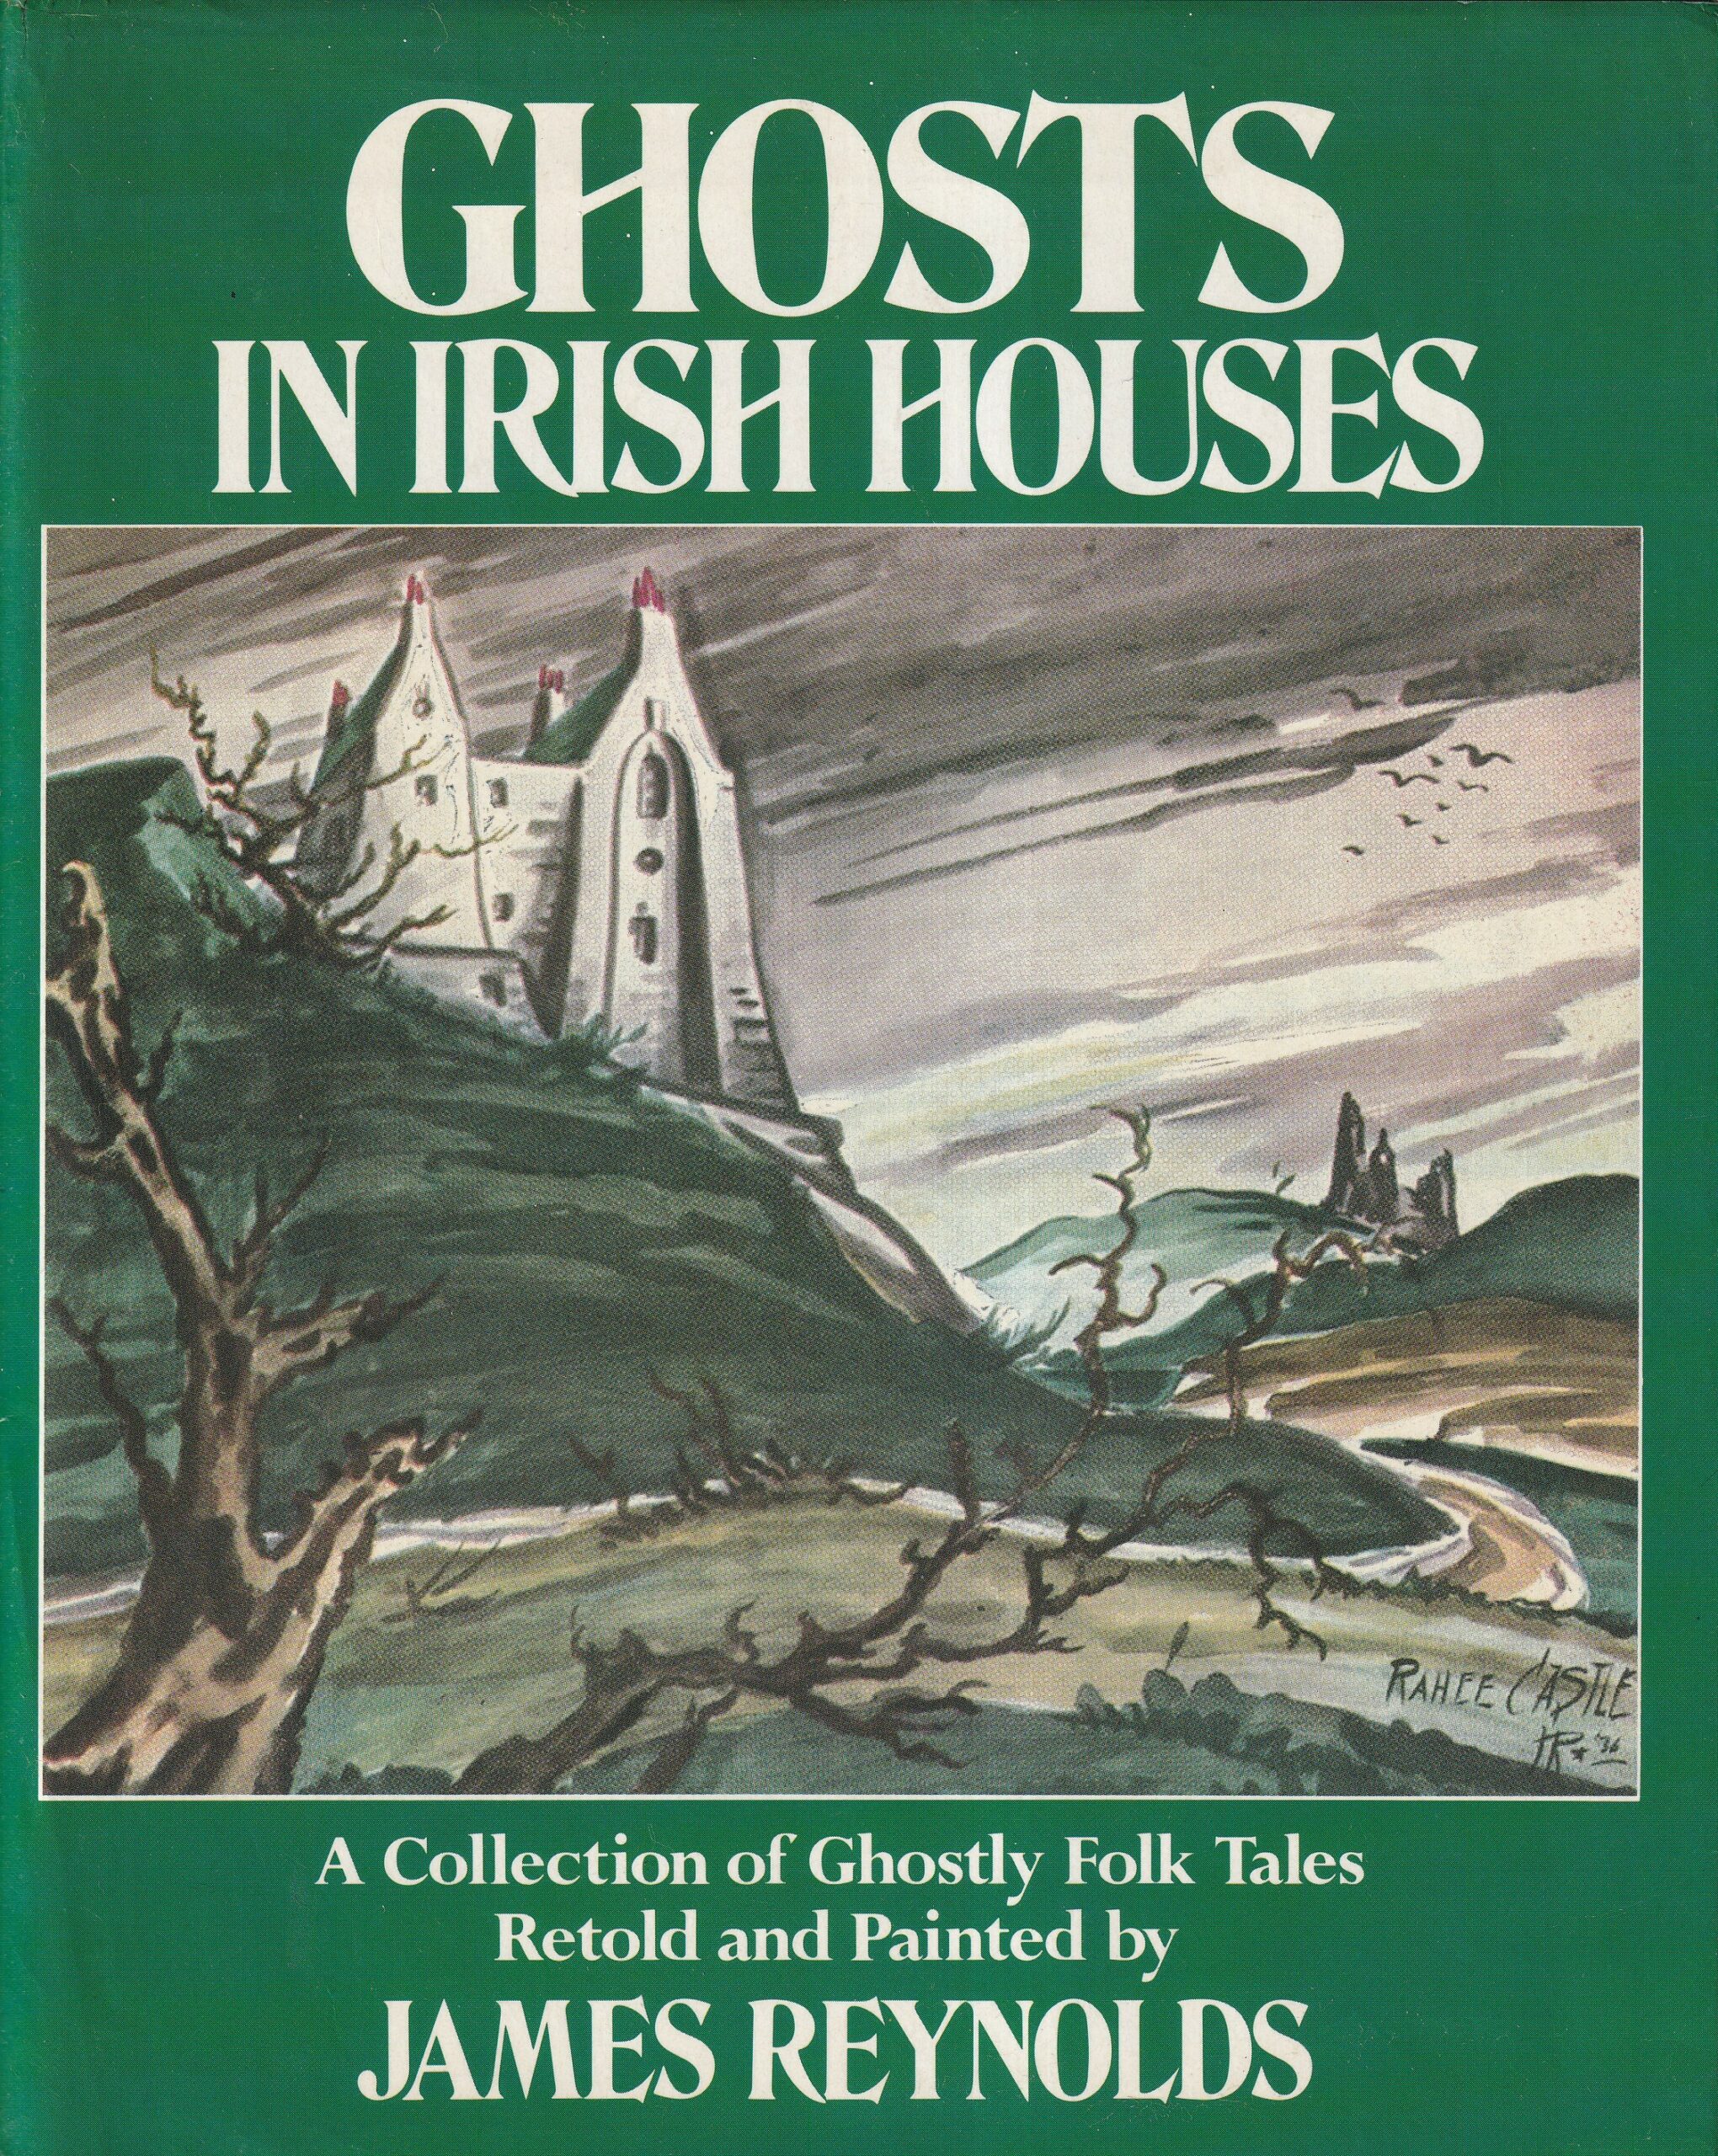 Ghosts in Irish Houses: A Collection of Ghostly Folk Tales by James Reynolds